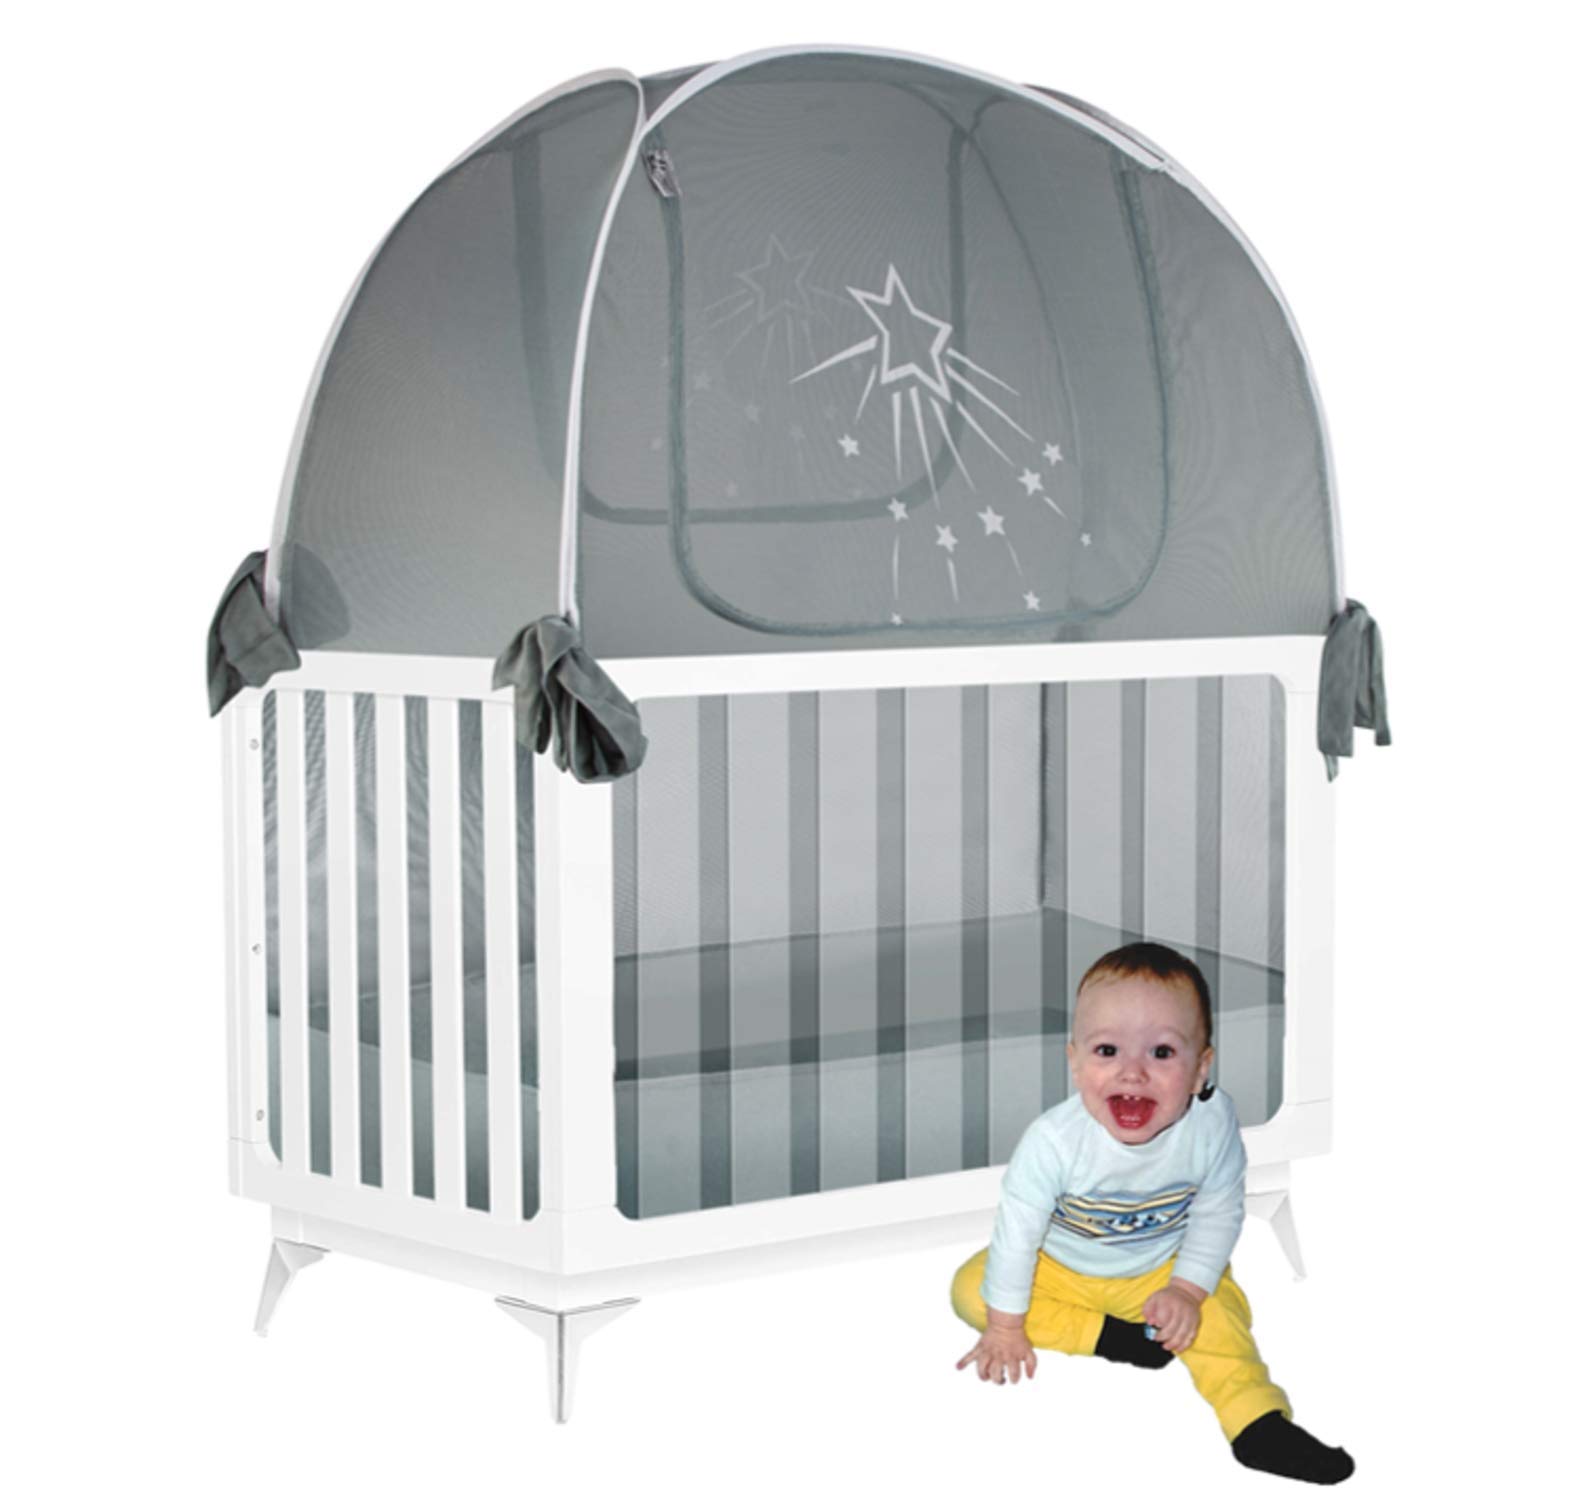 Baby in a crib with a safety net